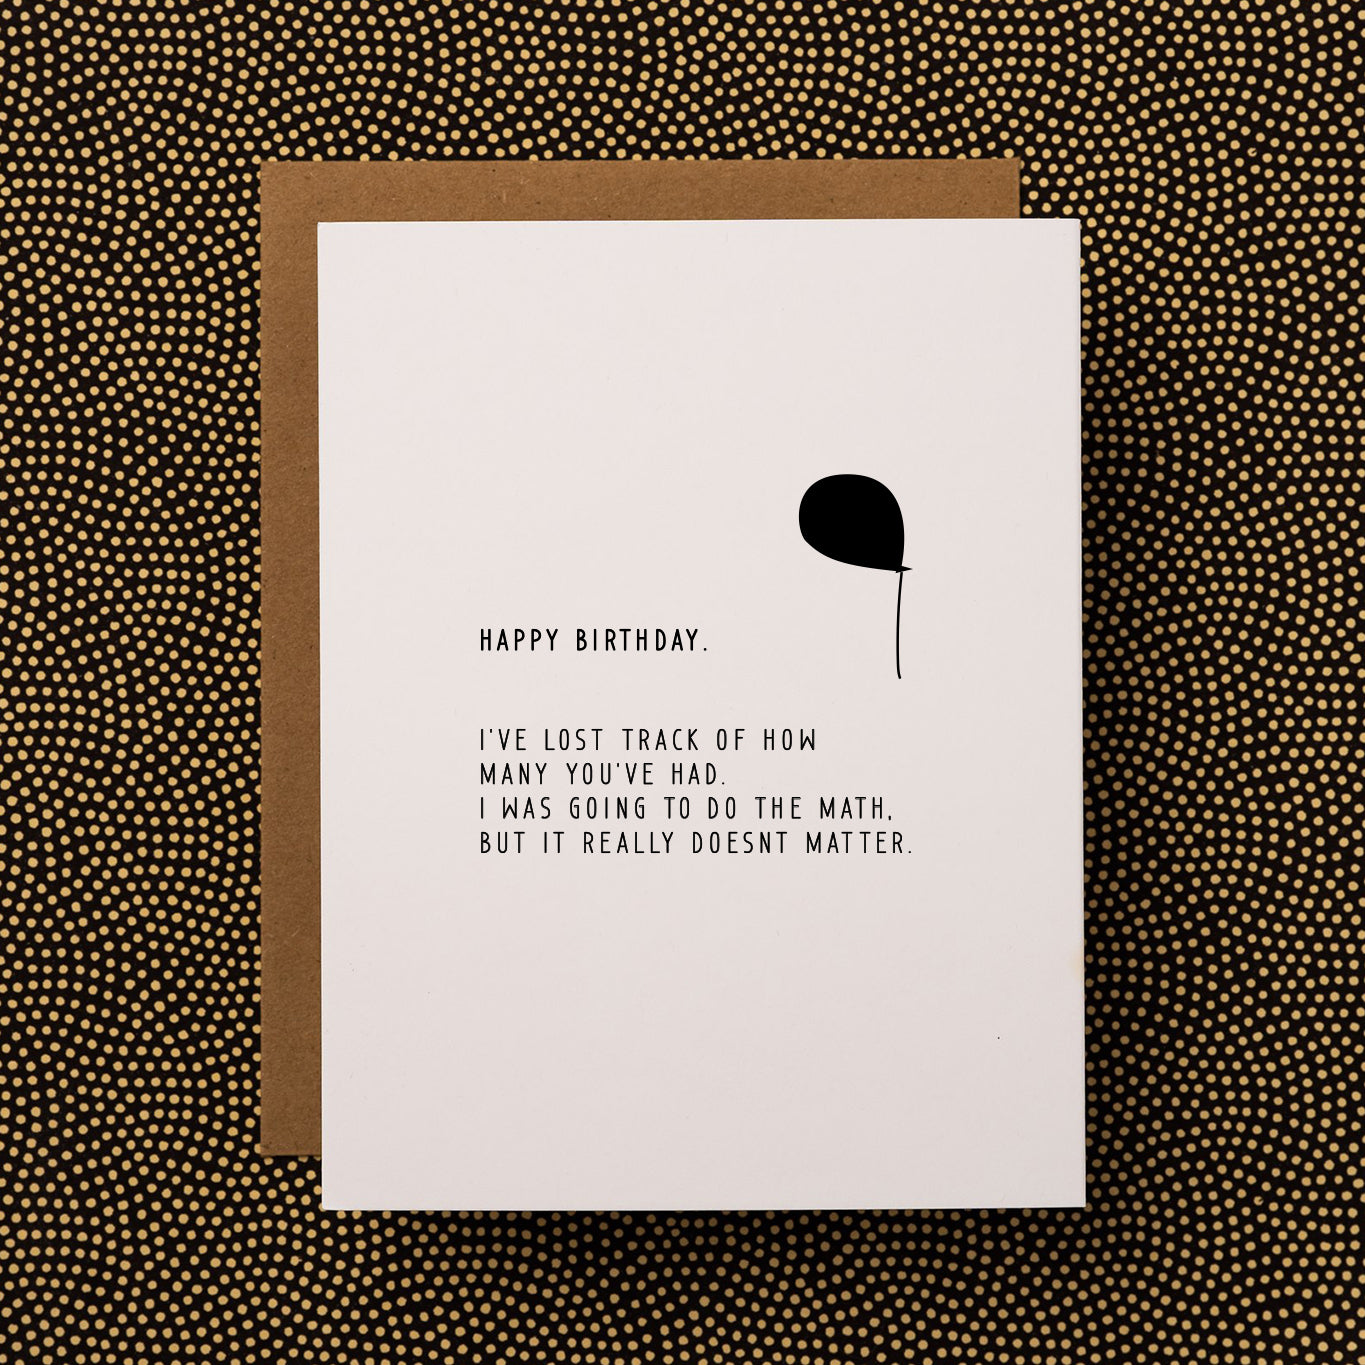 Front side of a dry witty bday card that reads "Happy Birthday. I've lost track of how many you've had. I was going to do the math, but it really doesnt matter. The funny birthday card is balck and white with a single deflated black balloon.